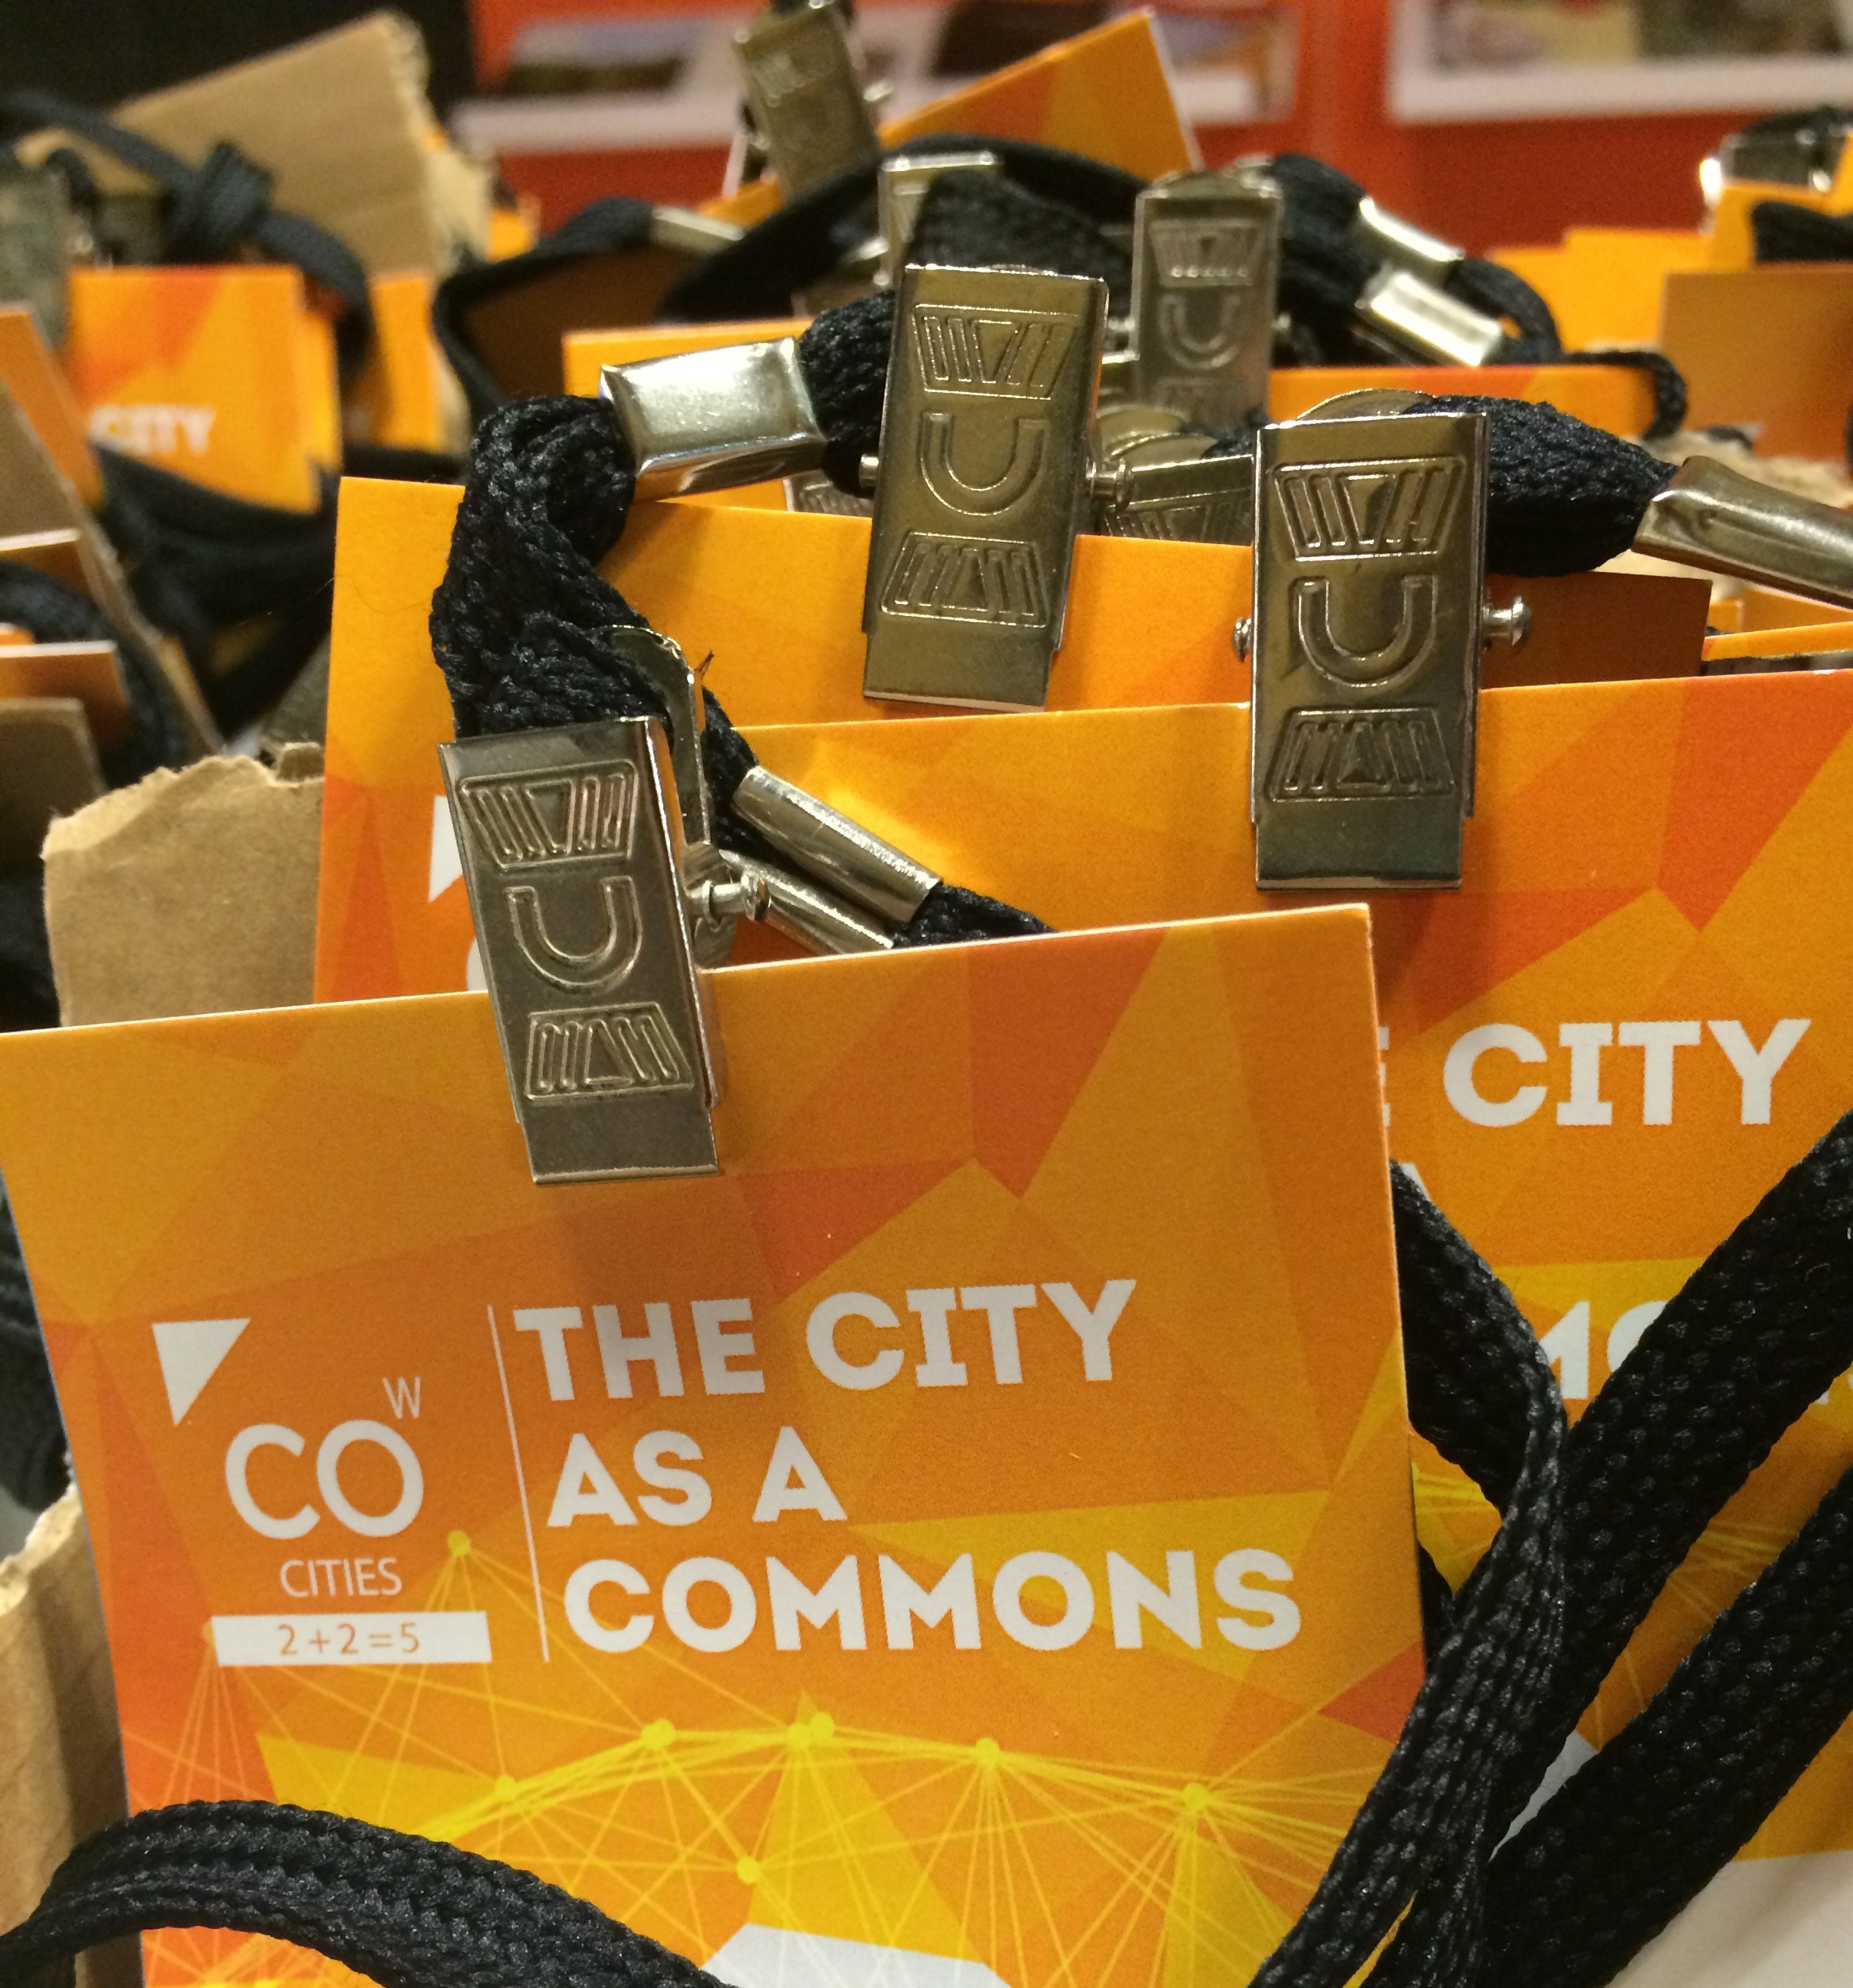 The City as a Commons Conference has arrived!